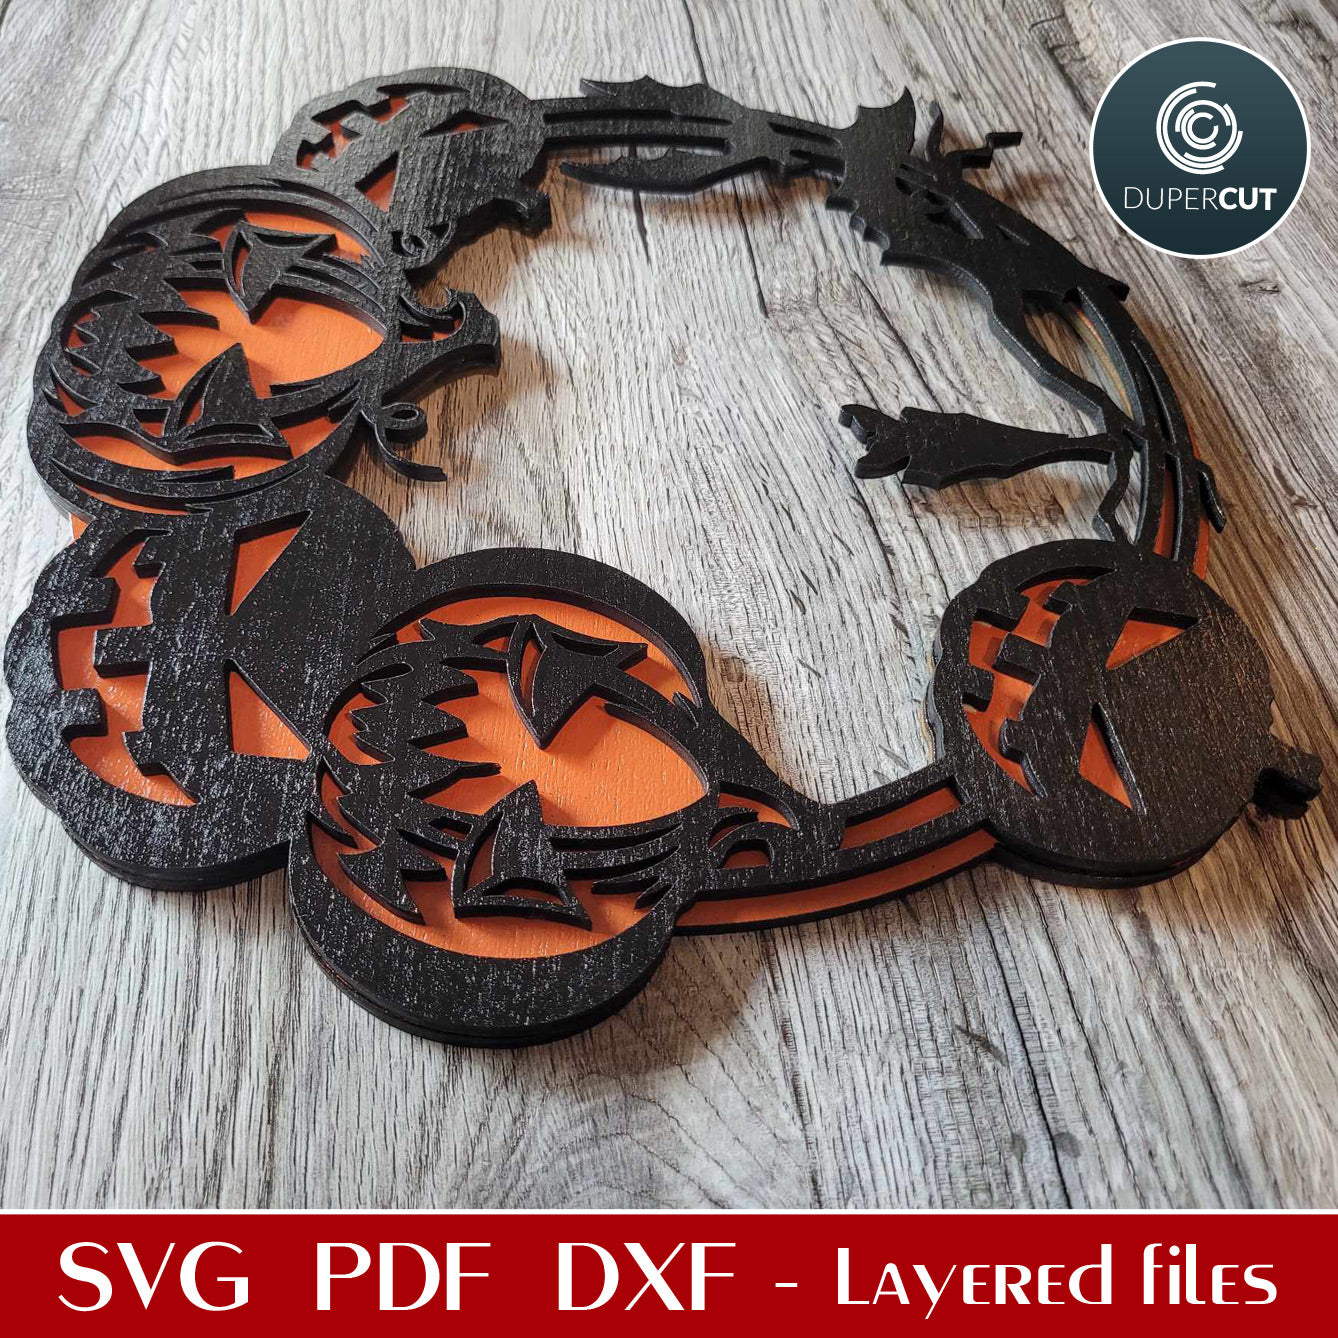 Halloween pumpkins door hanger sign - Layered SVG PDF DXF vector template for Glowforge, x-tool, cnc plasma machines, laser cutting machines, scroll saw pattern by www.DuperCut.com